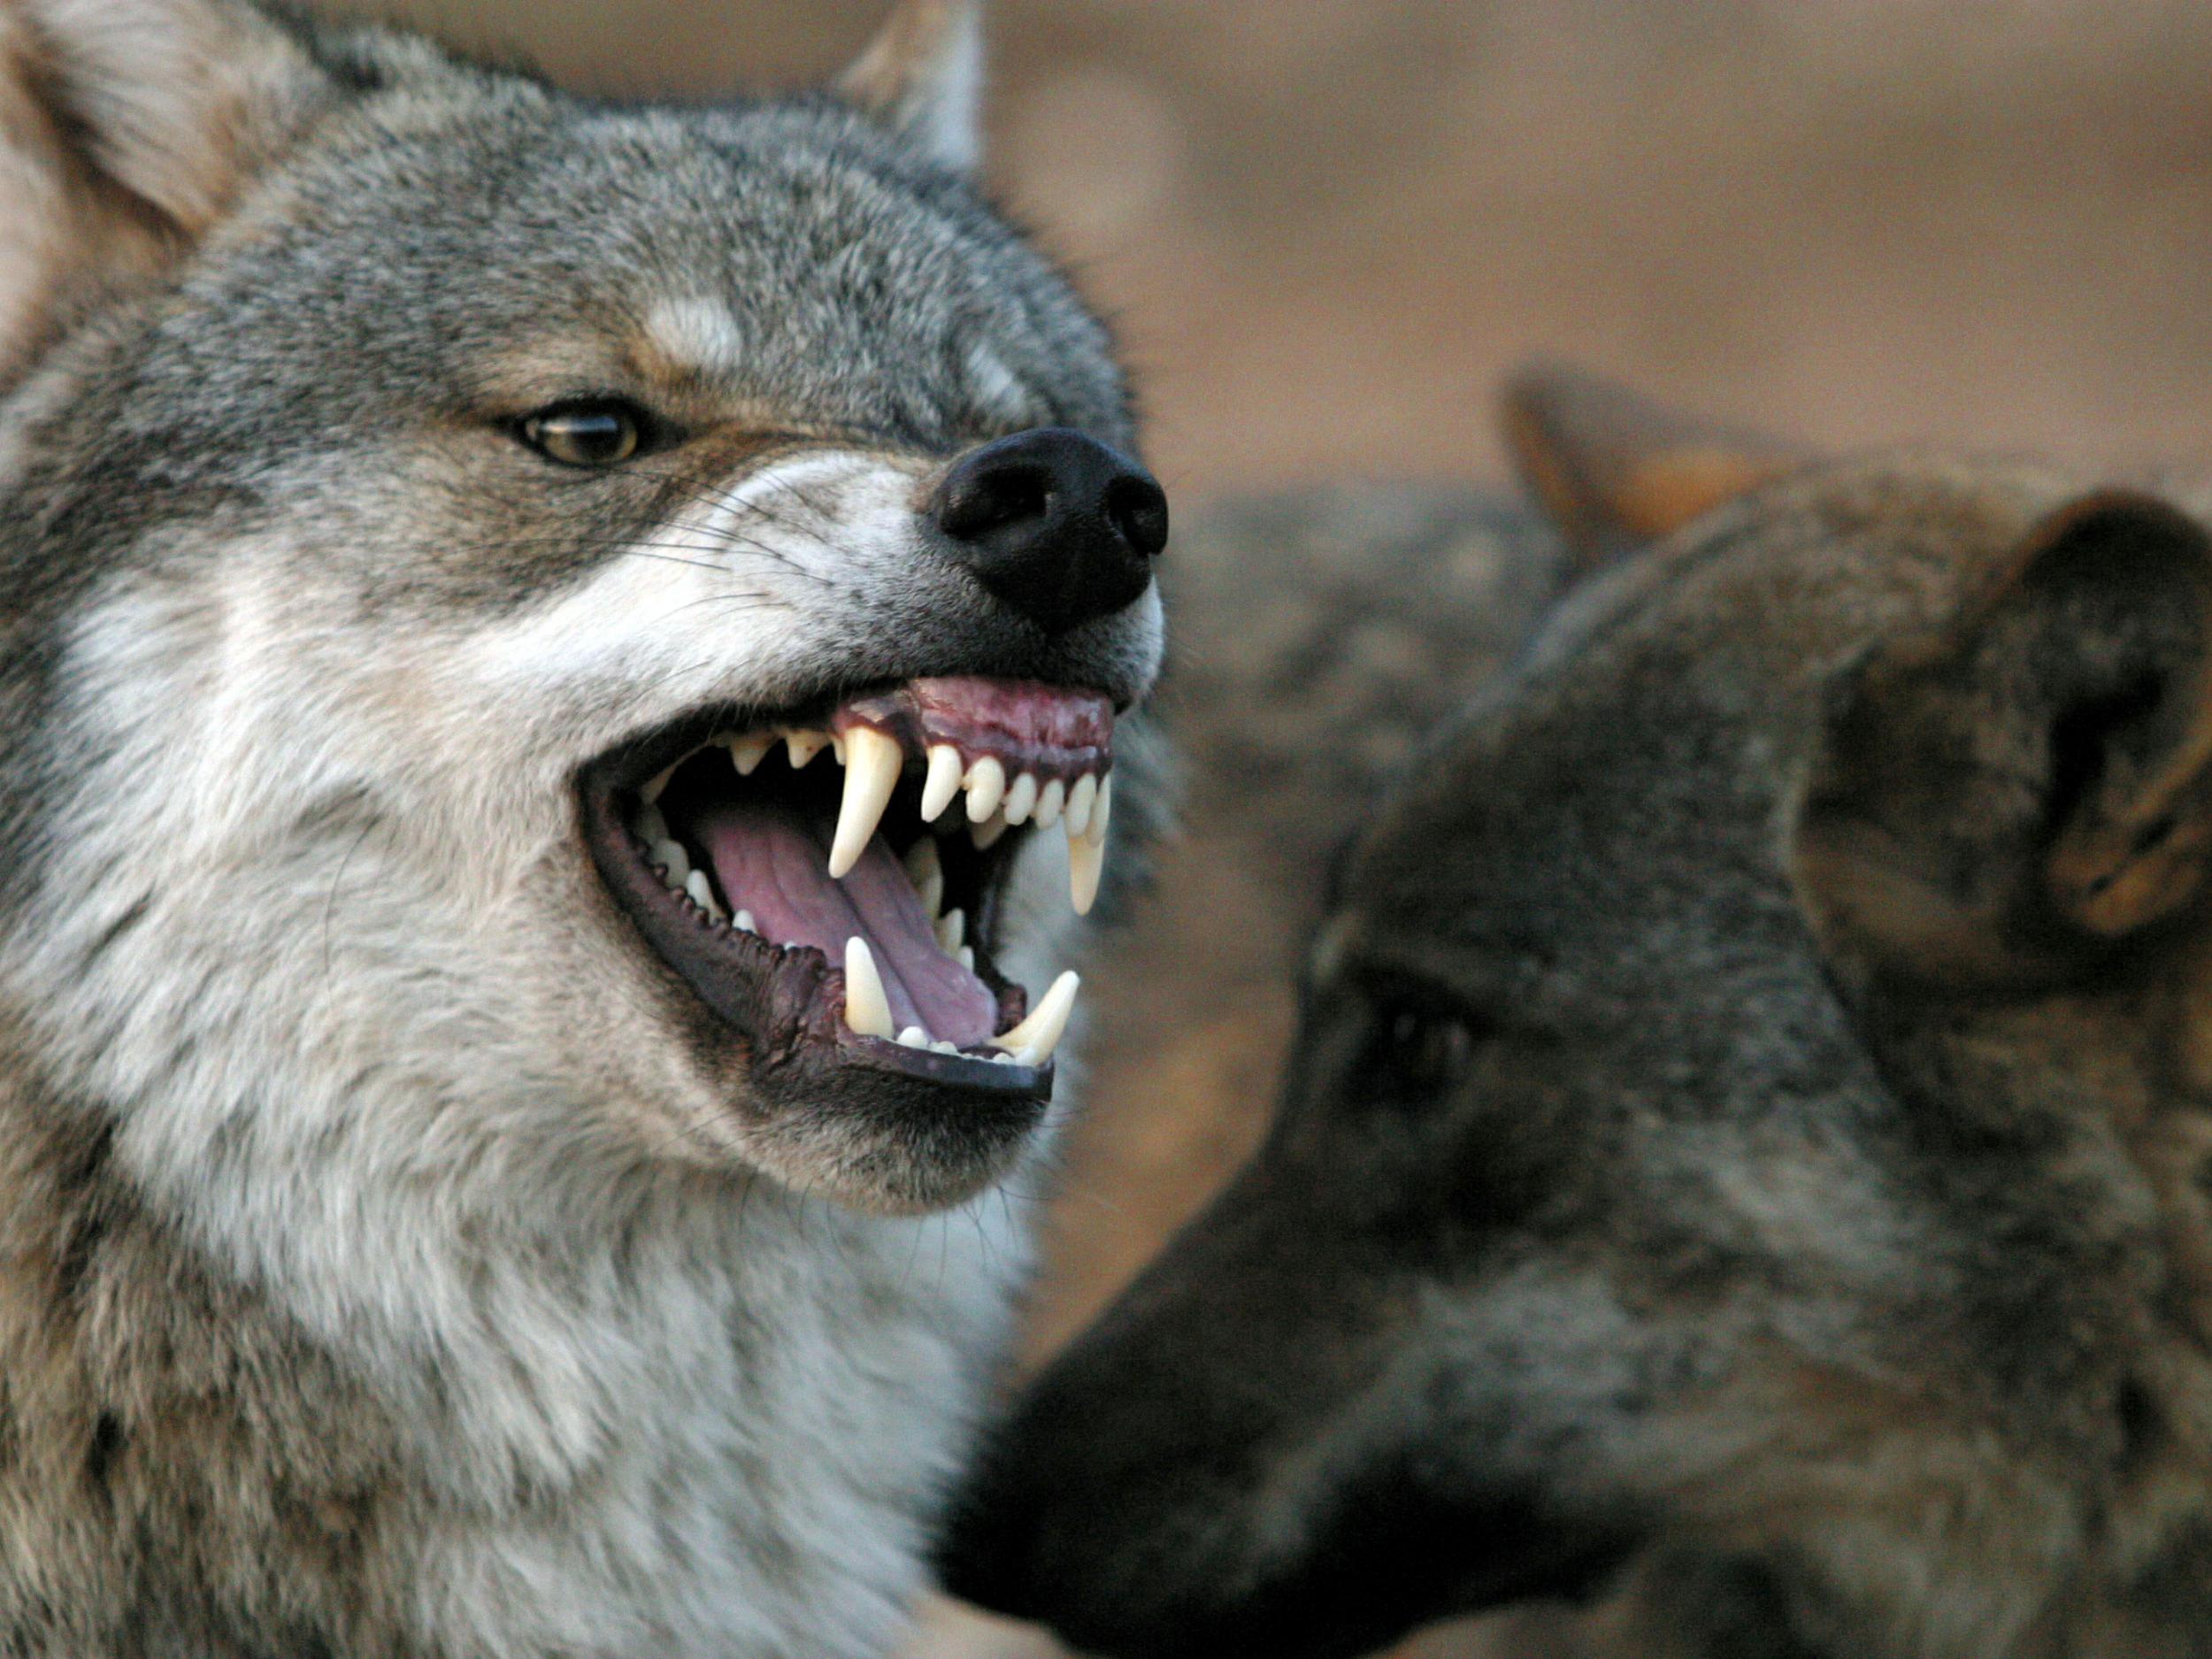 A wolf snarls at another wolf in Lobopark in Antequera, southern Spain December 26, 2004